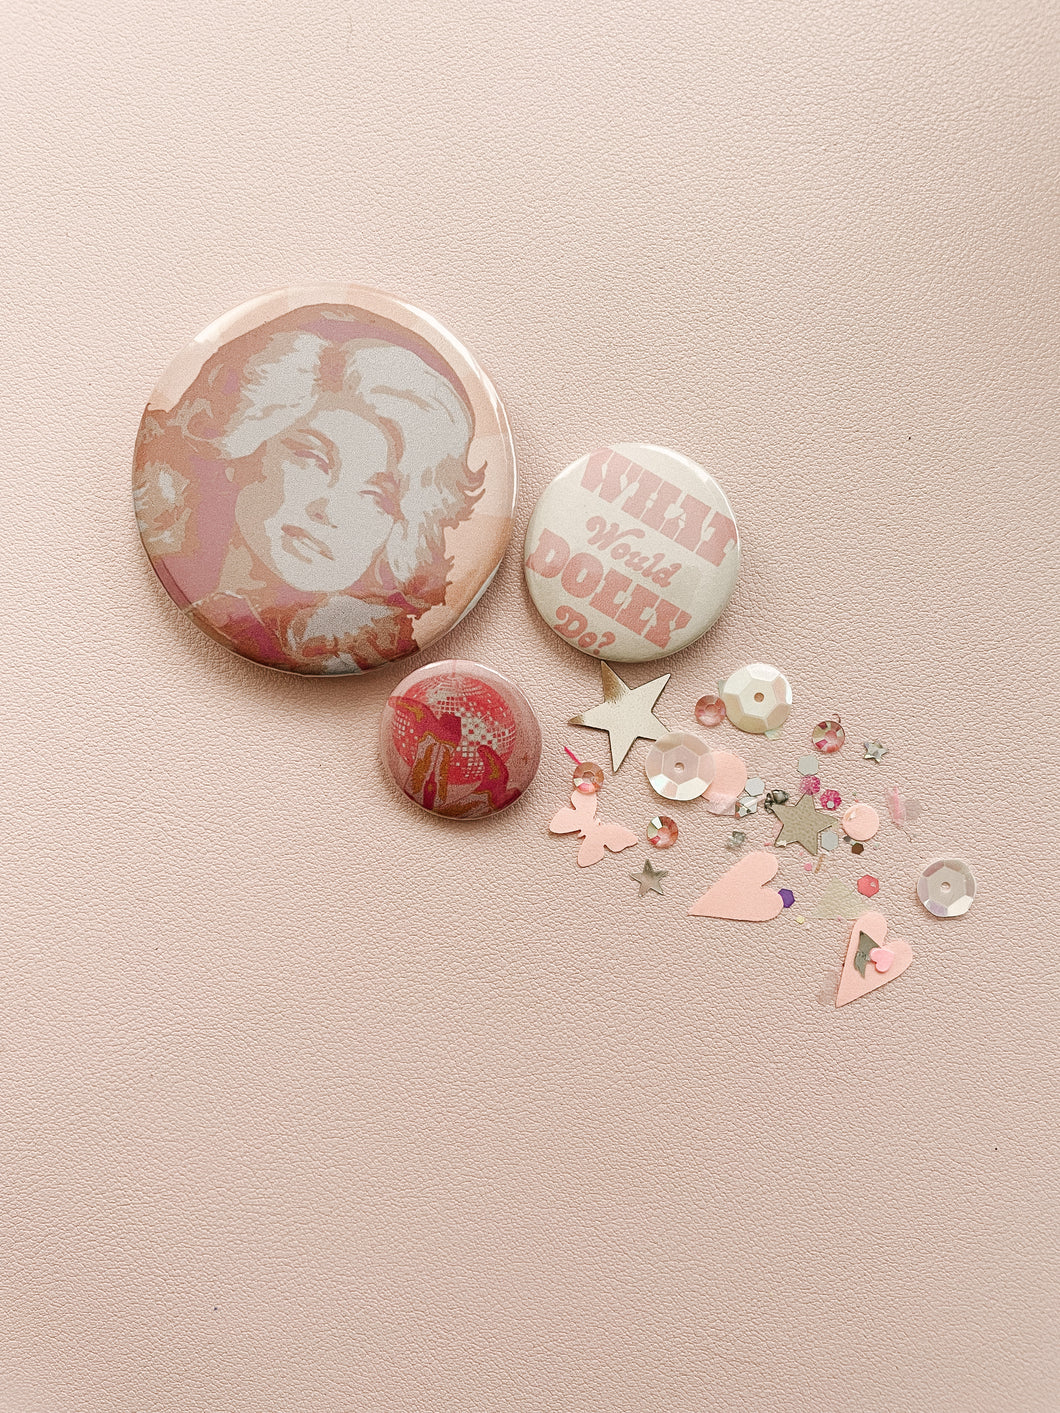 The Dolly Buttons